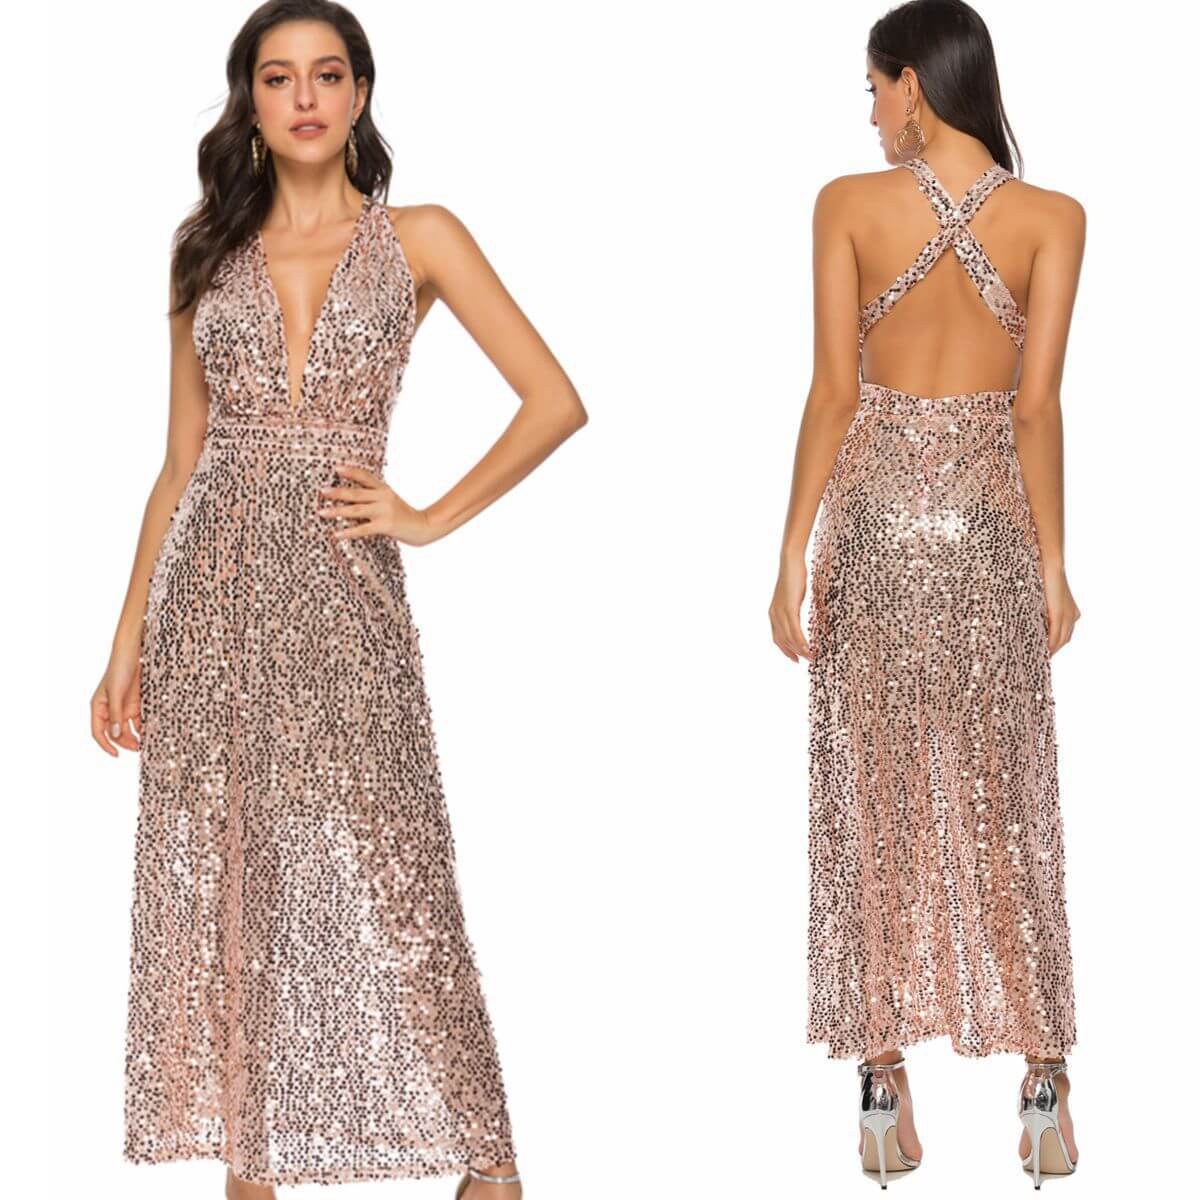 Spaghetti Straps V-neck Backless Sequins Long Party Dress